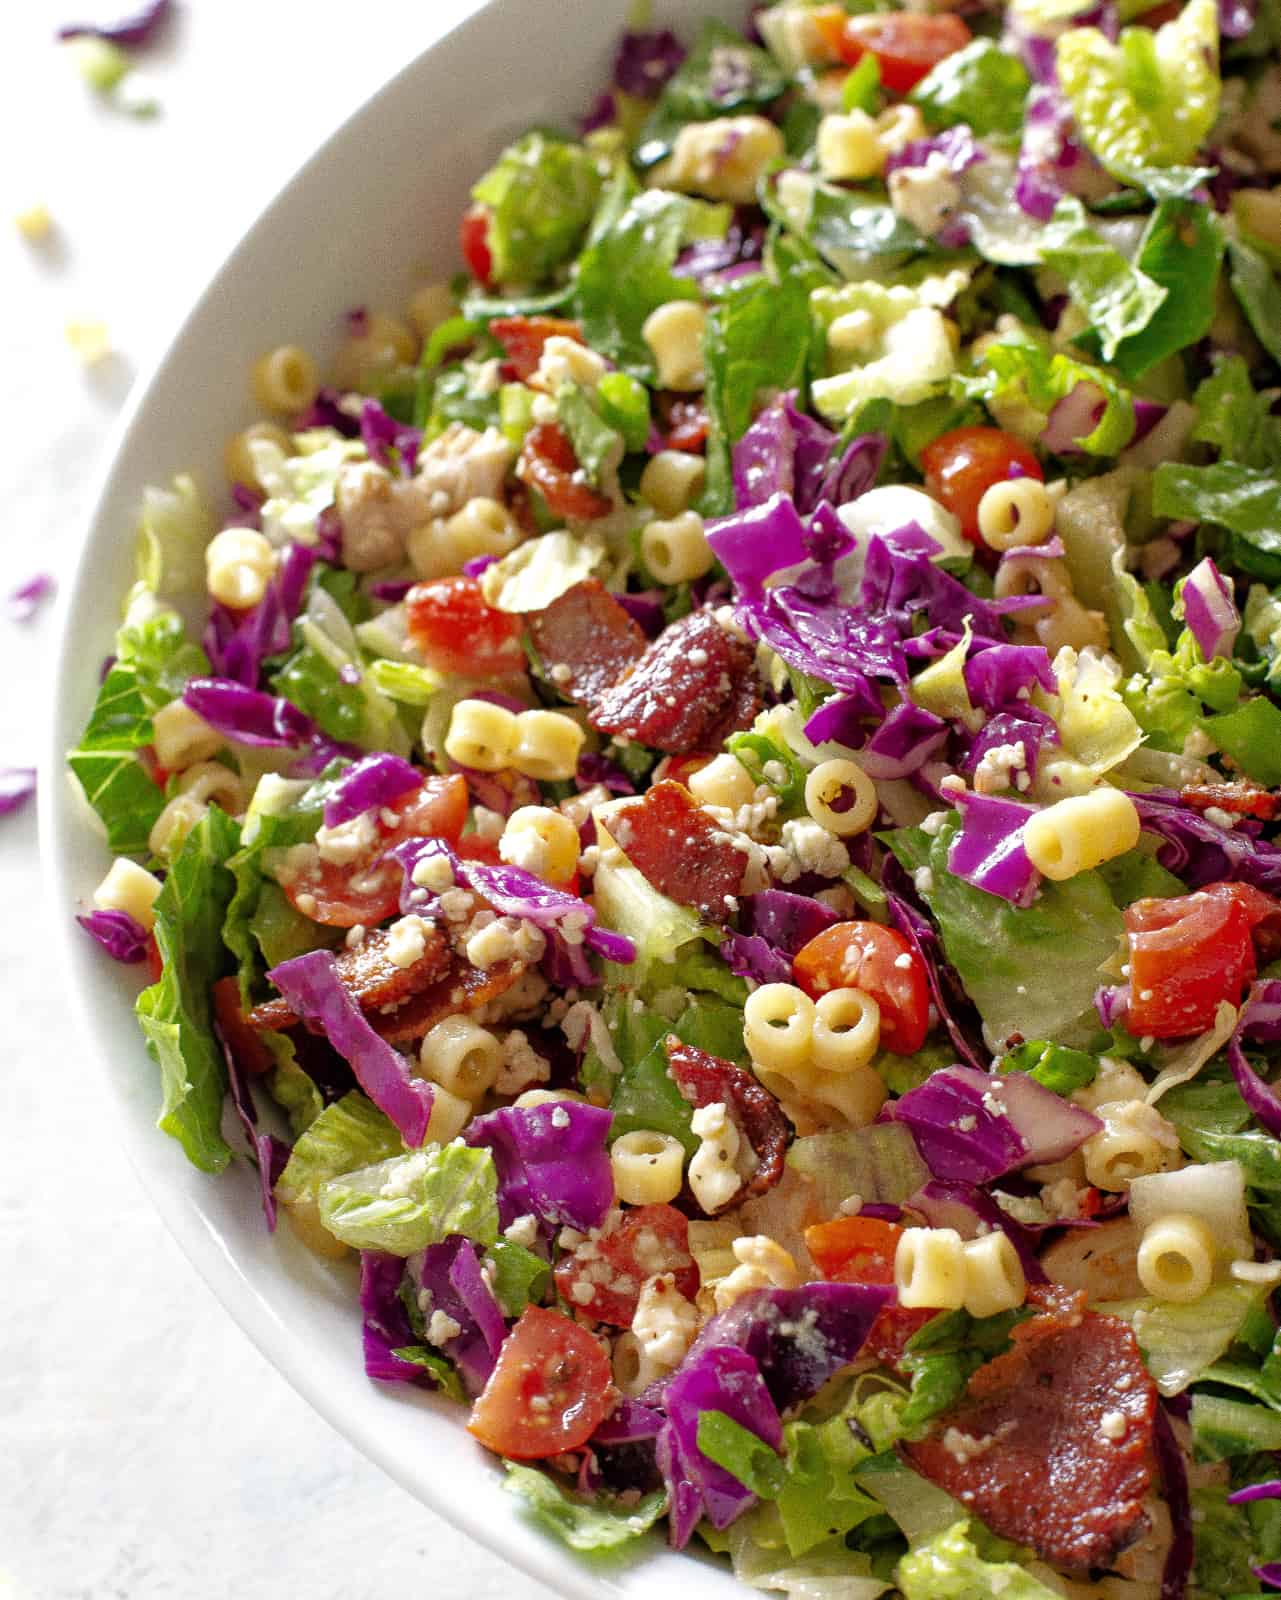 Quick Basic Chopped Salad - Easy Salad Recipe with Lots of Flavor